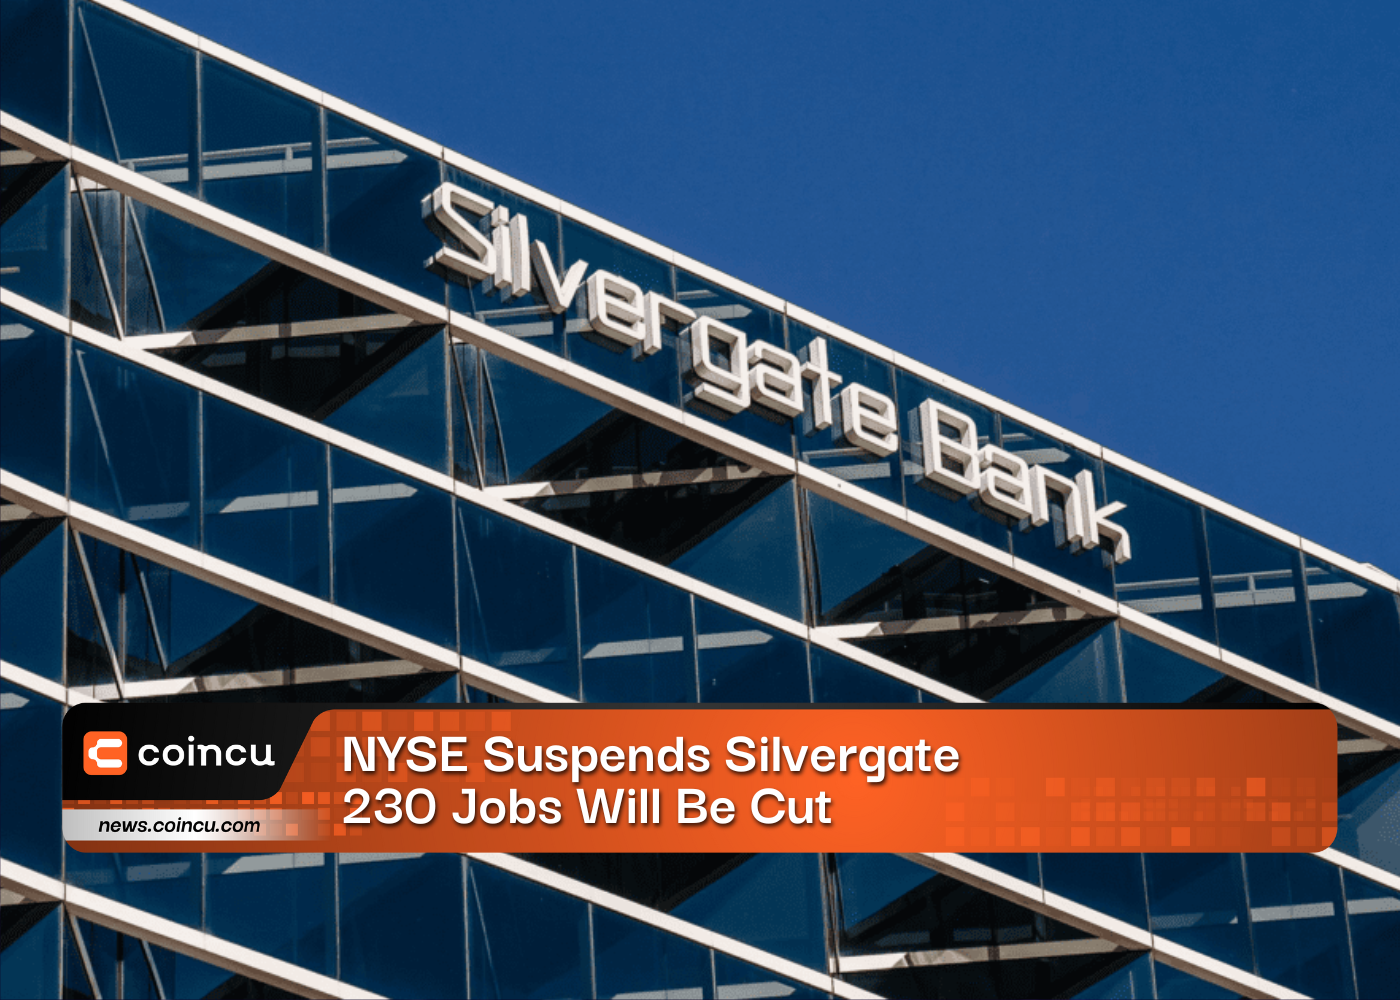 NYSE Suspends Silvergate, 230 Jobs Will Be Cut